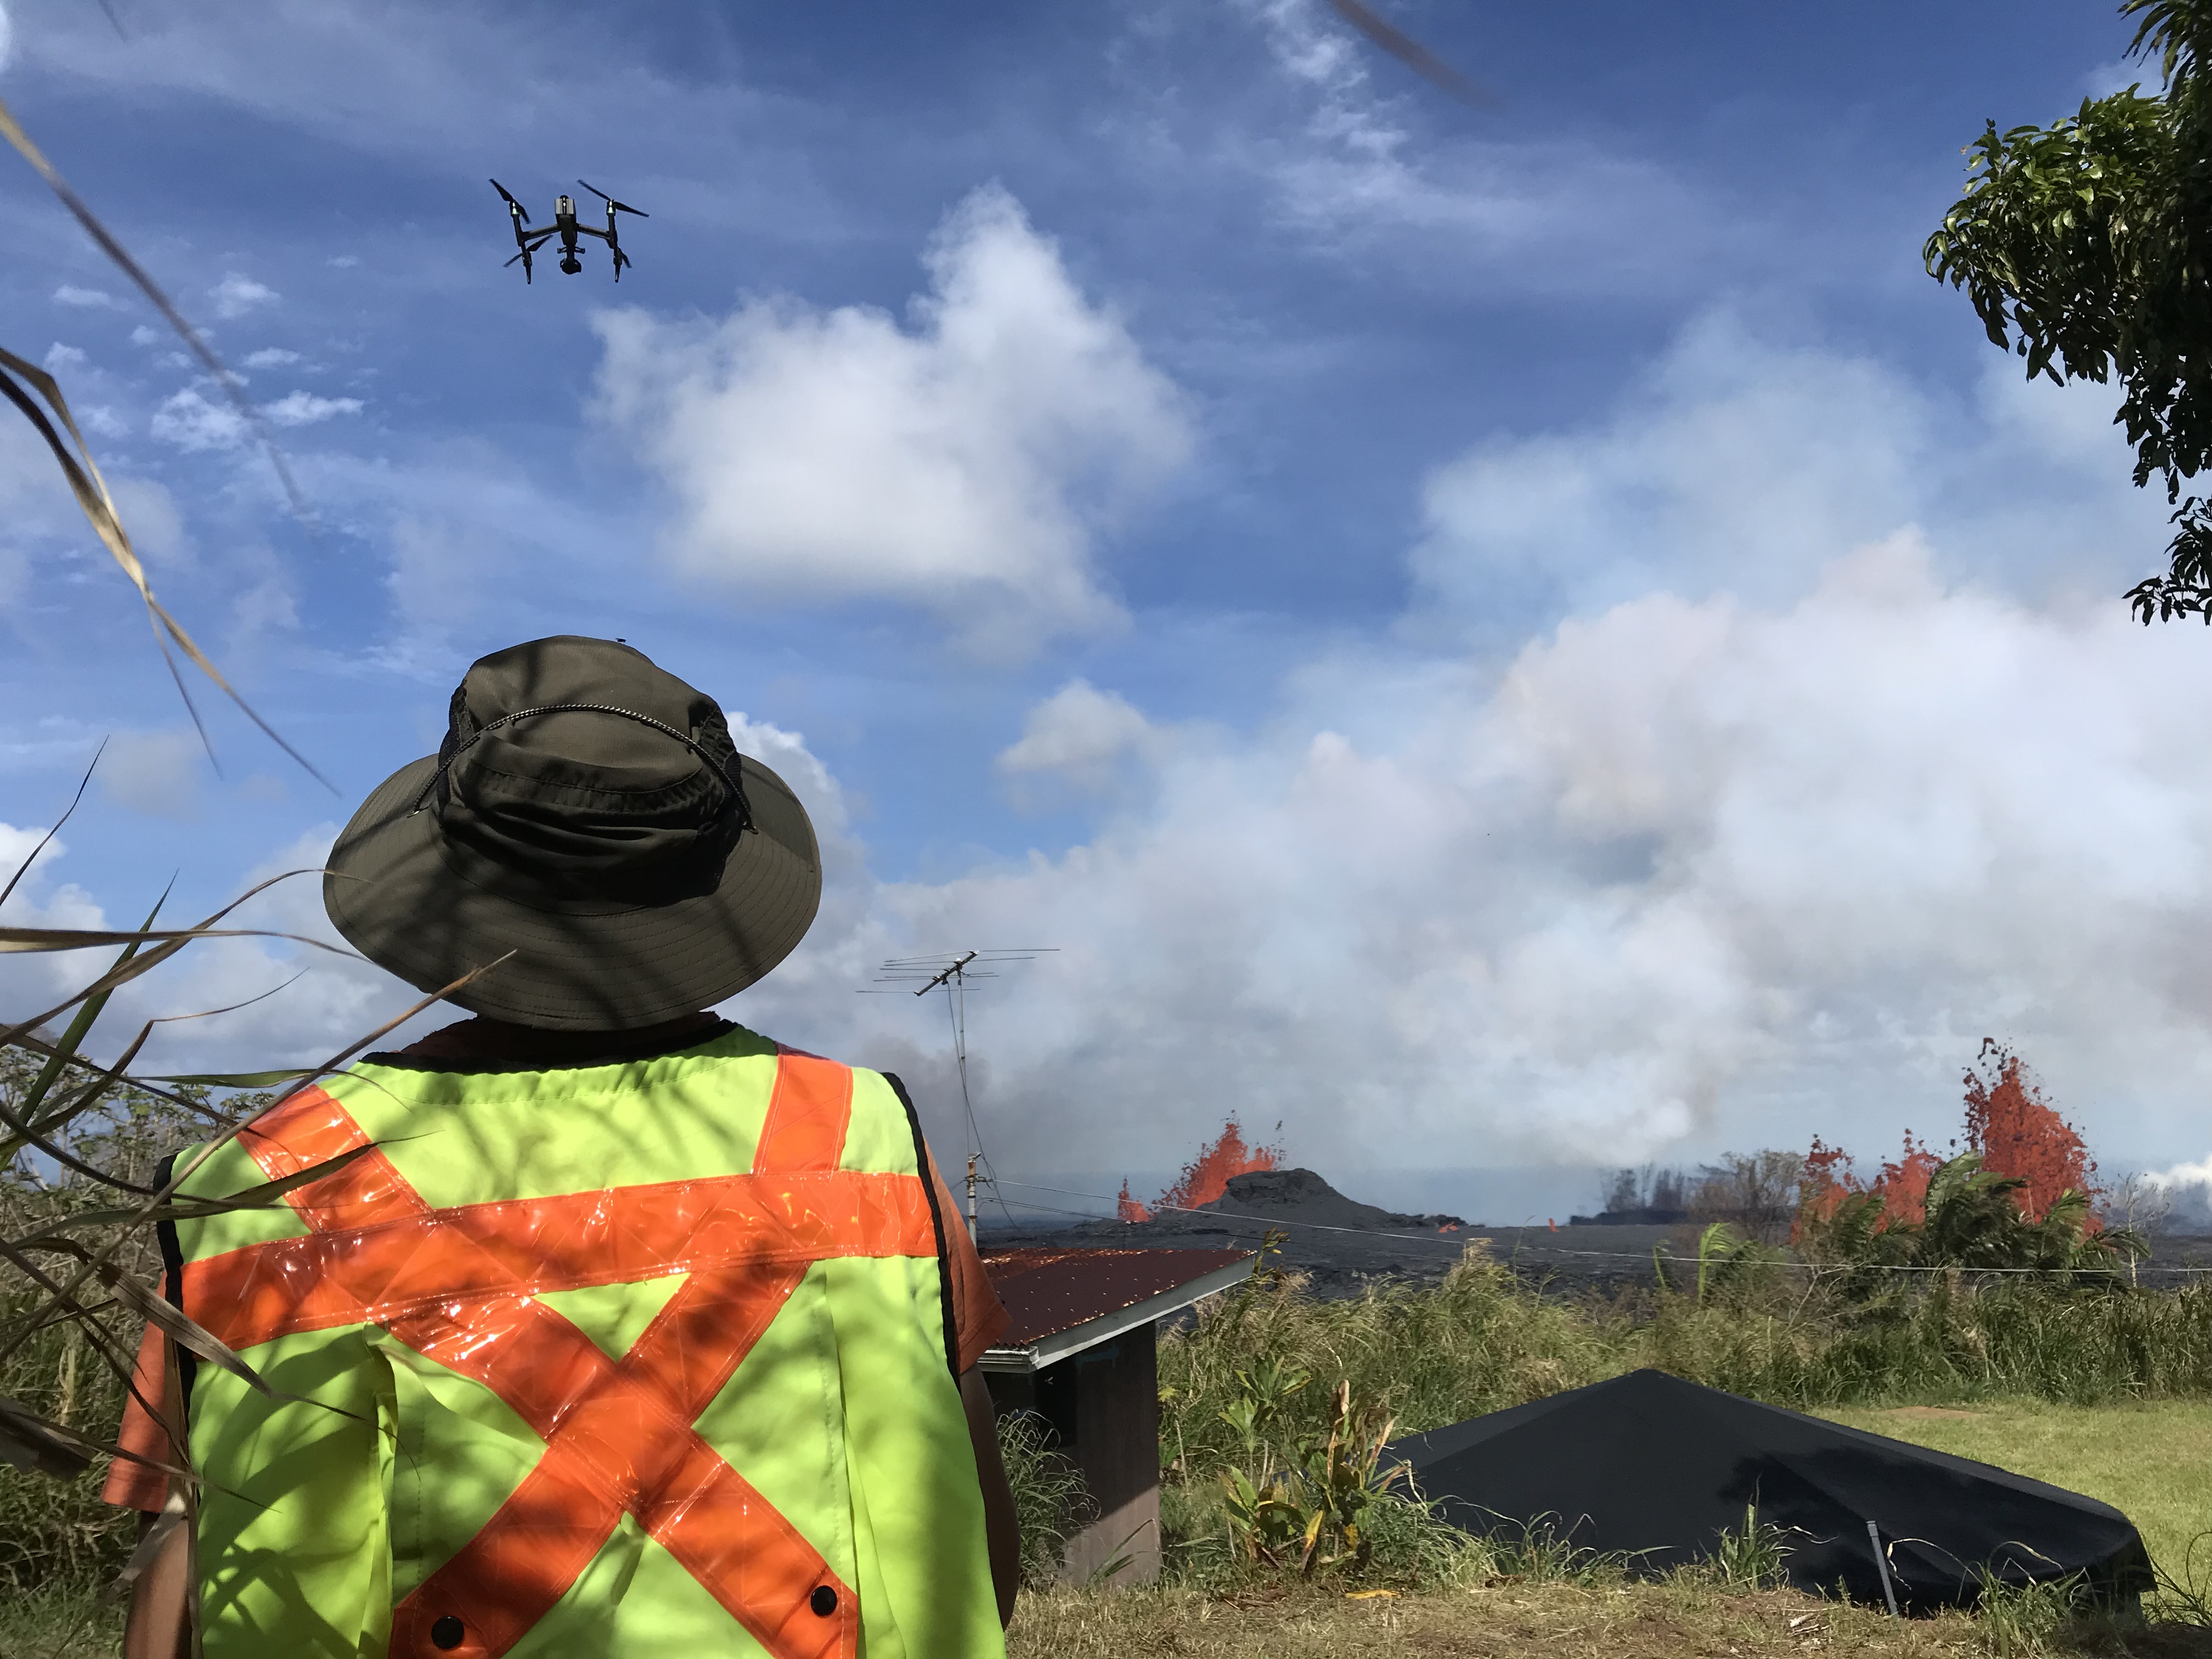 Flying a drone in front of a volcanic eruption